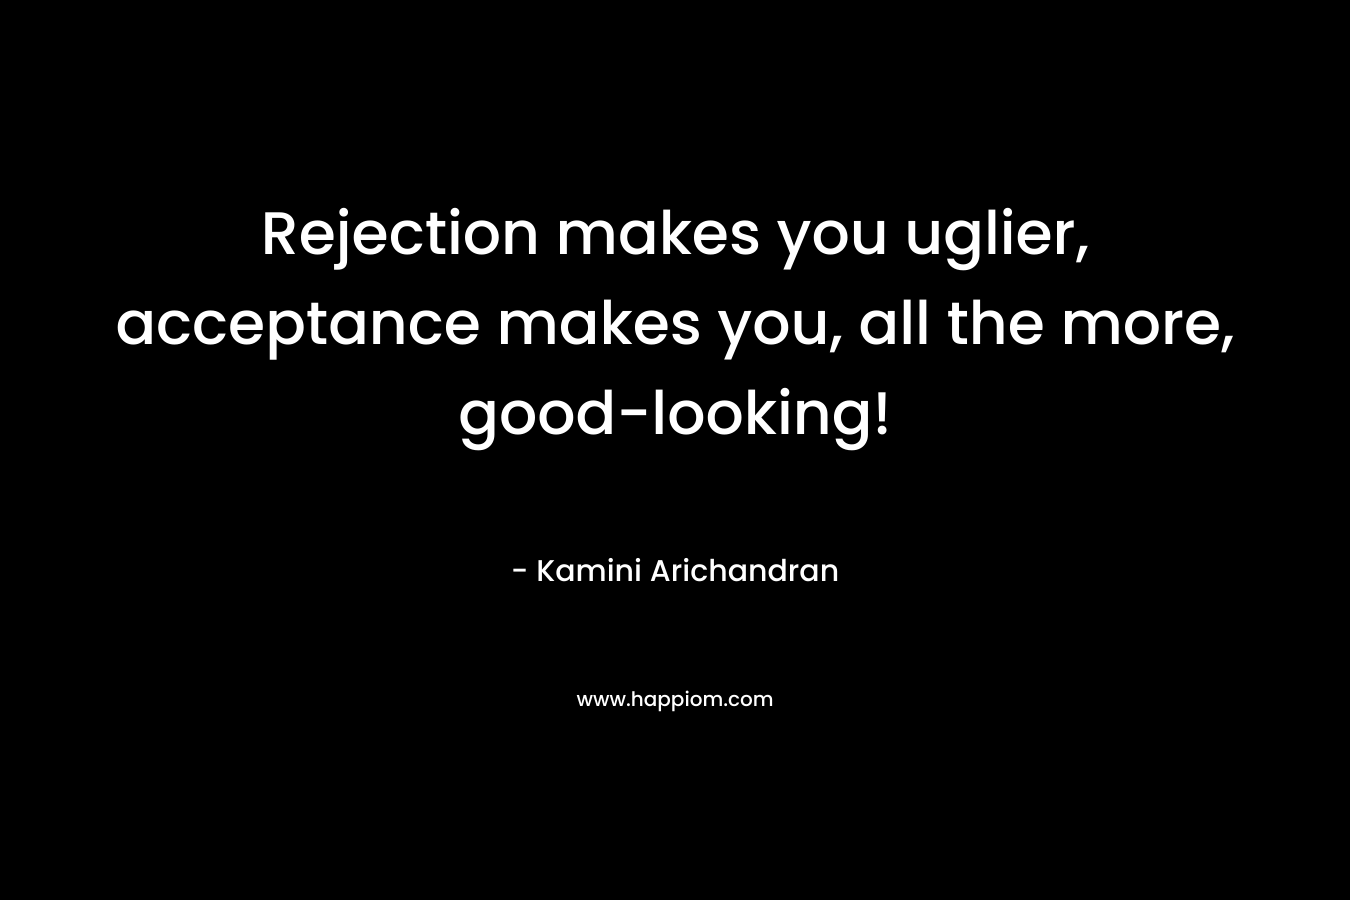 Rejection makes you uglier, acceptance makes you, all the more, good-looking!